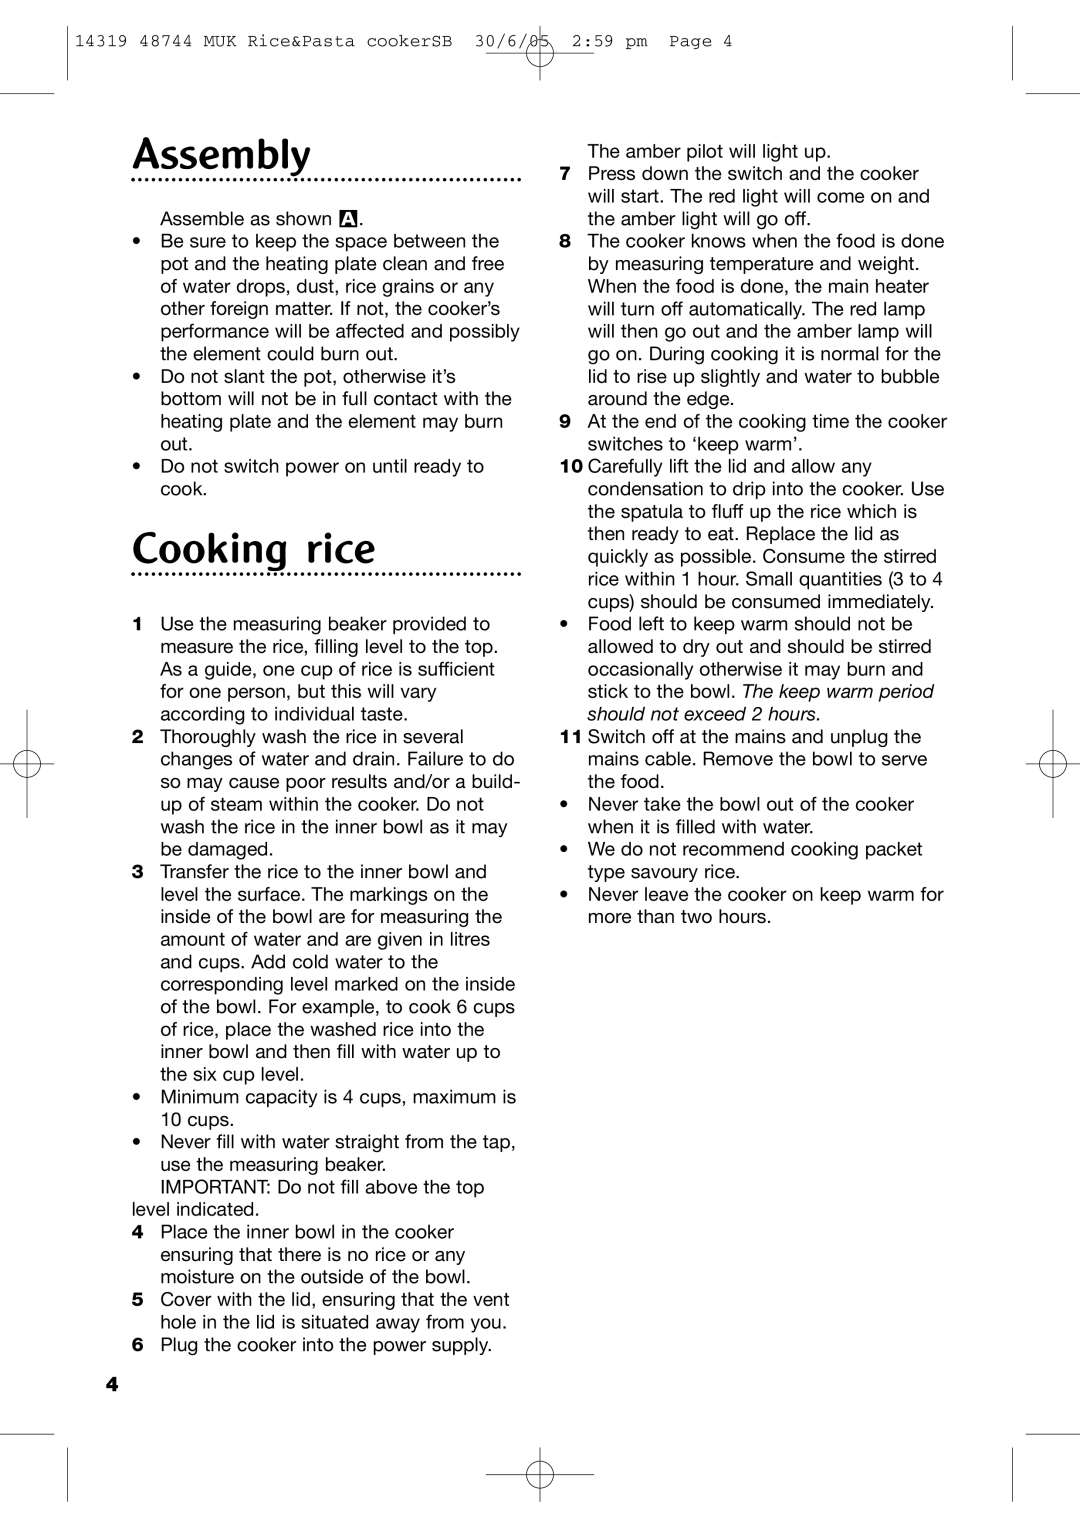 Morphy Richards Rice & Pasta Cooker manual Assembly, Cooking rice 